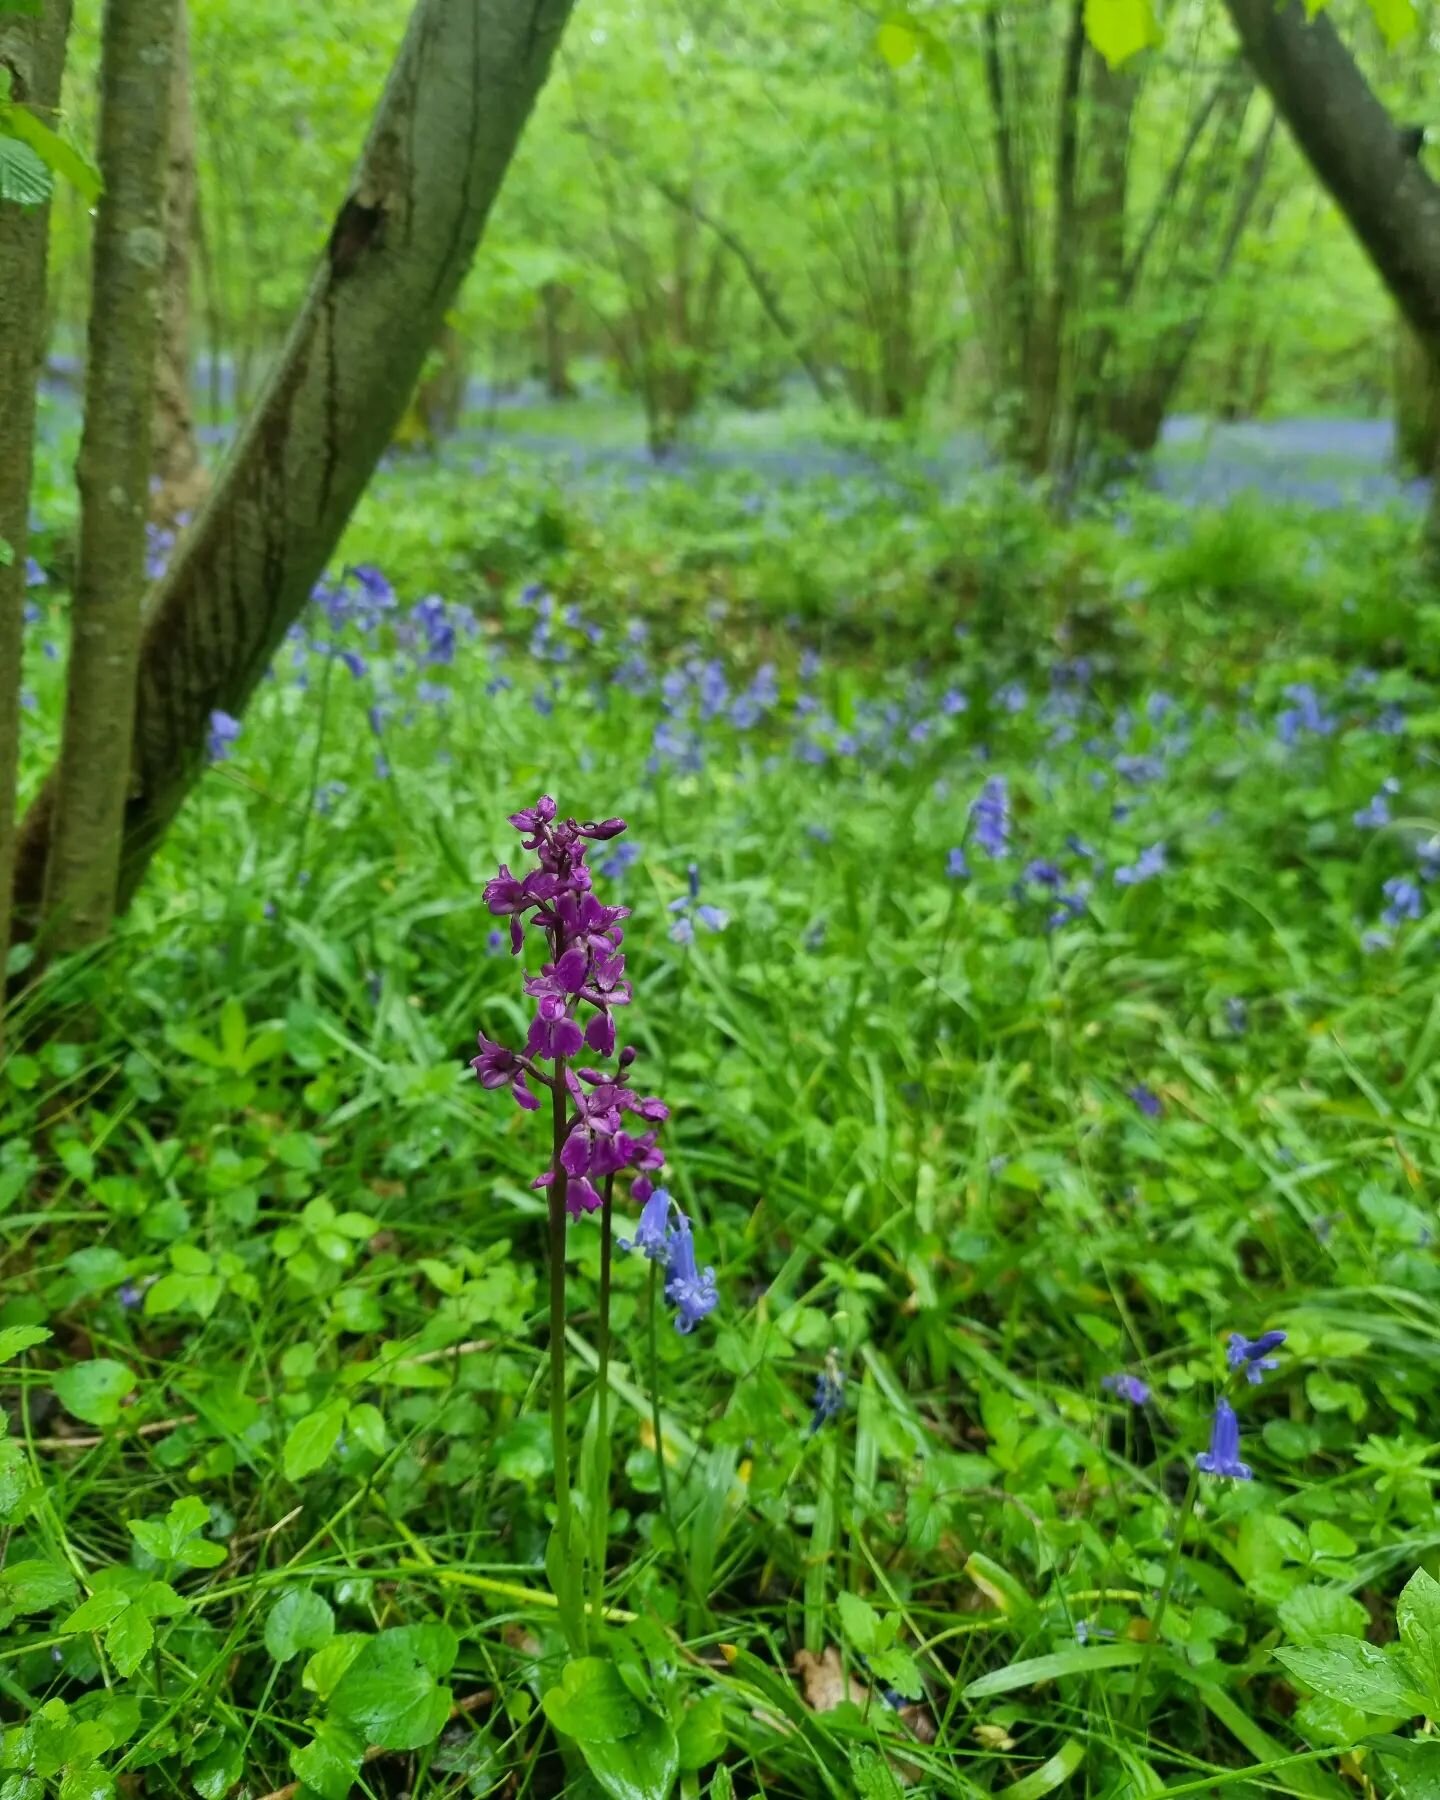 A solitary Early Purple Orchid standing guard over a sea of English bluebells.

#spring #flowers #woodland #Orchid #bluebells #bluebellwoods